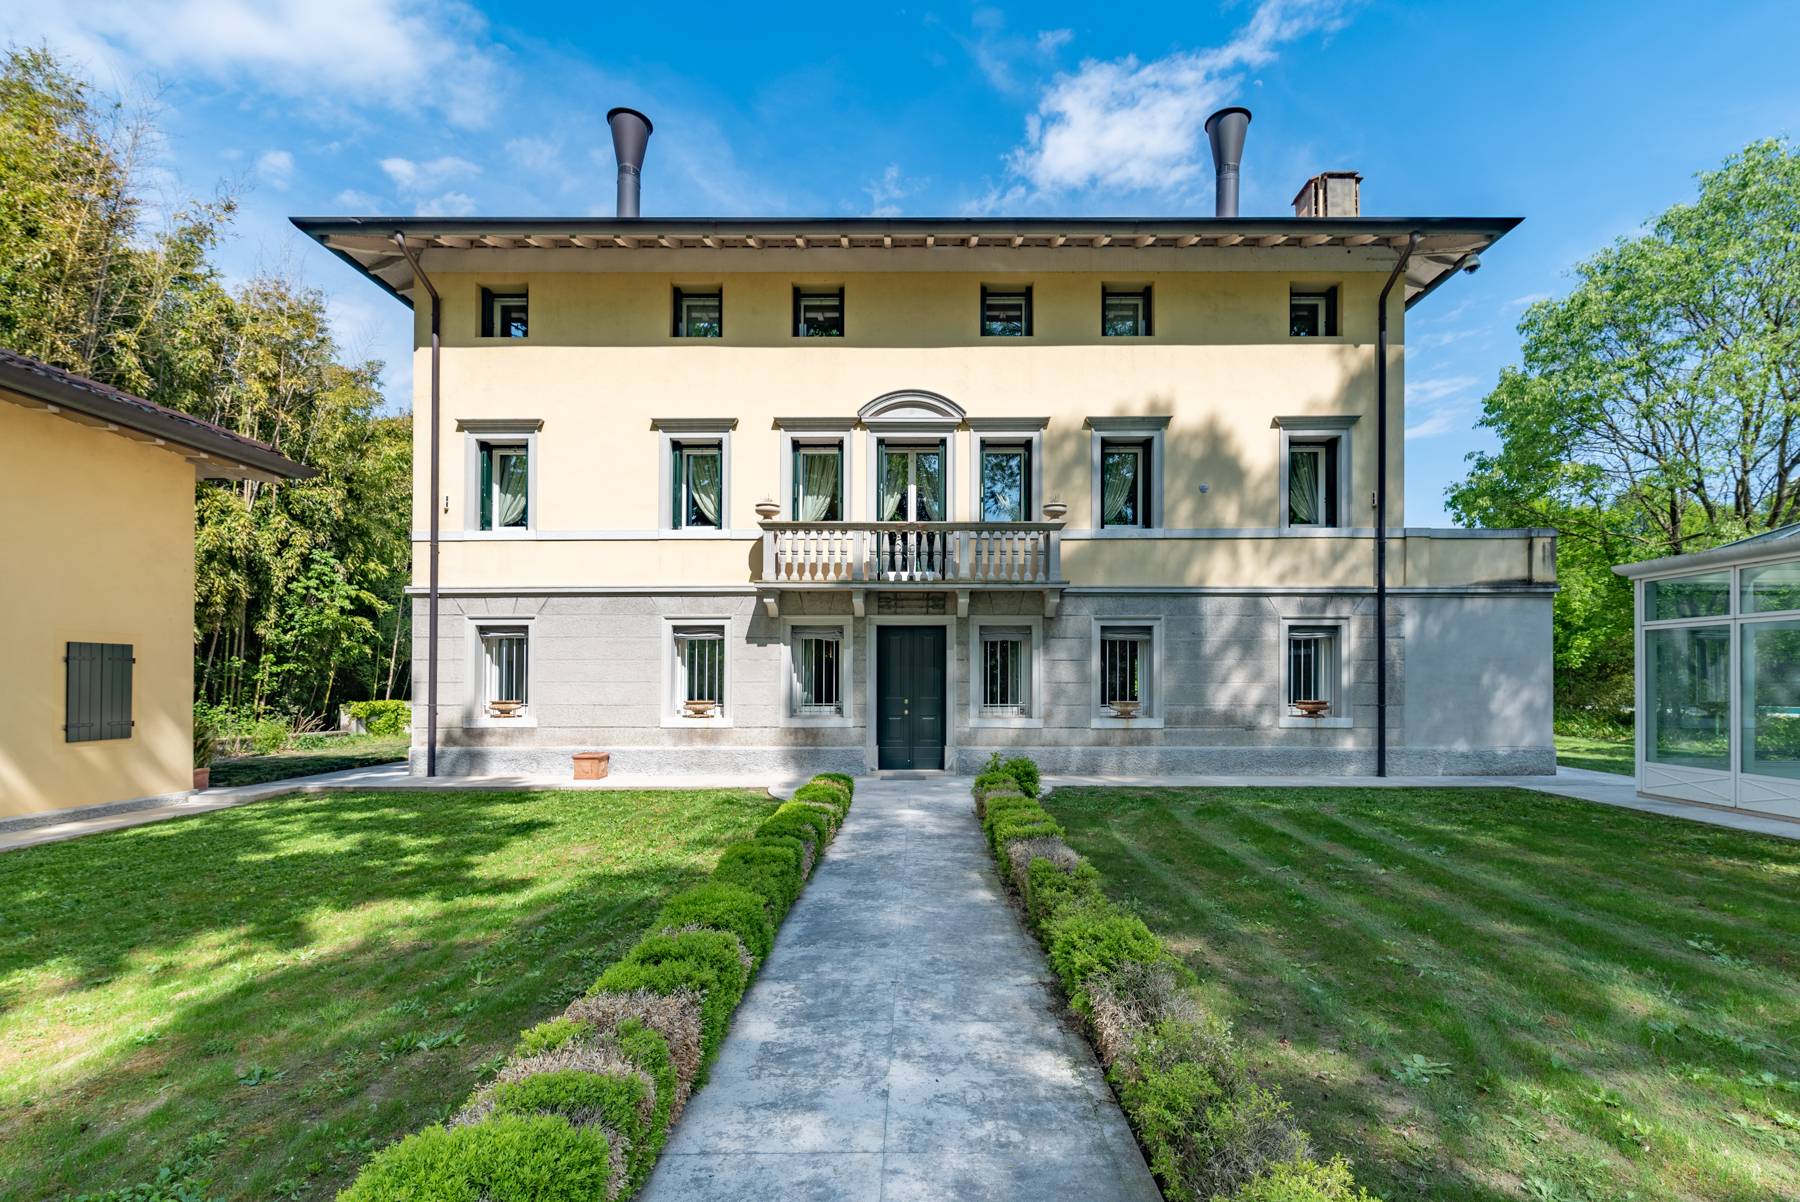 Elegant renovated historic villa with park swimming pool and outbuildings